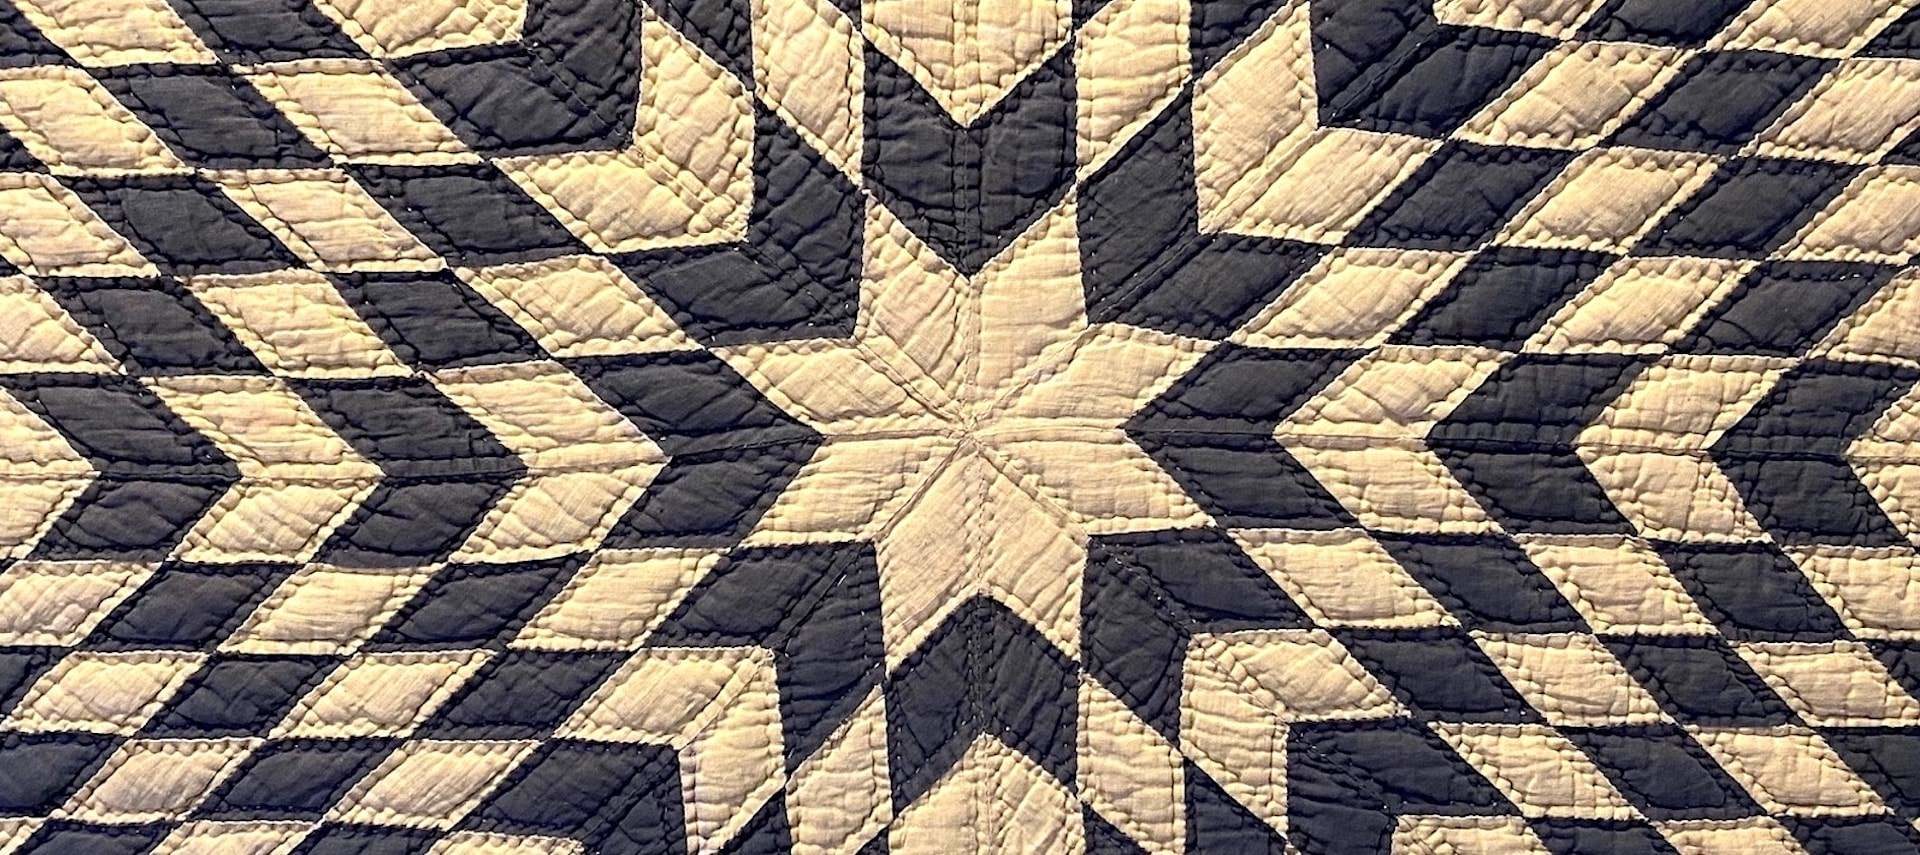 Close up view of a quilt with black and cream star design